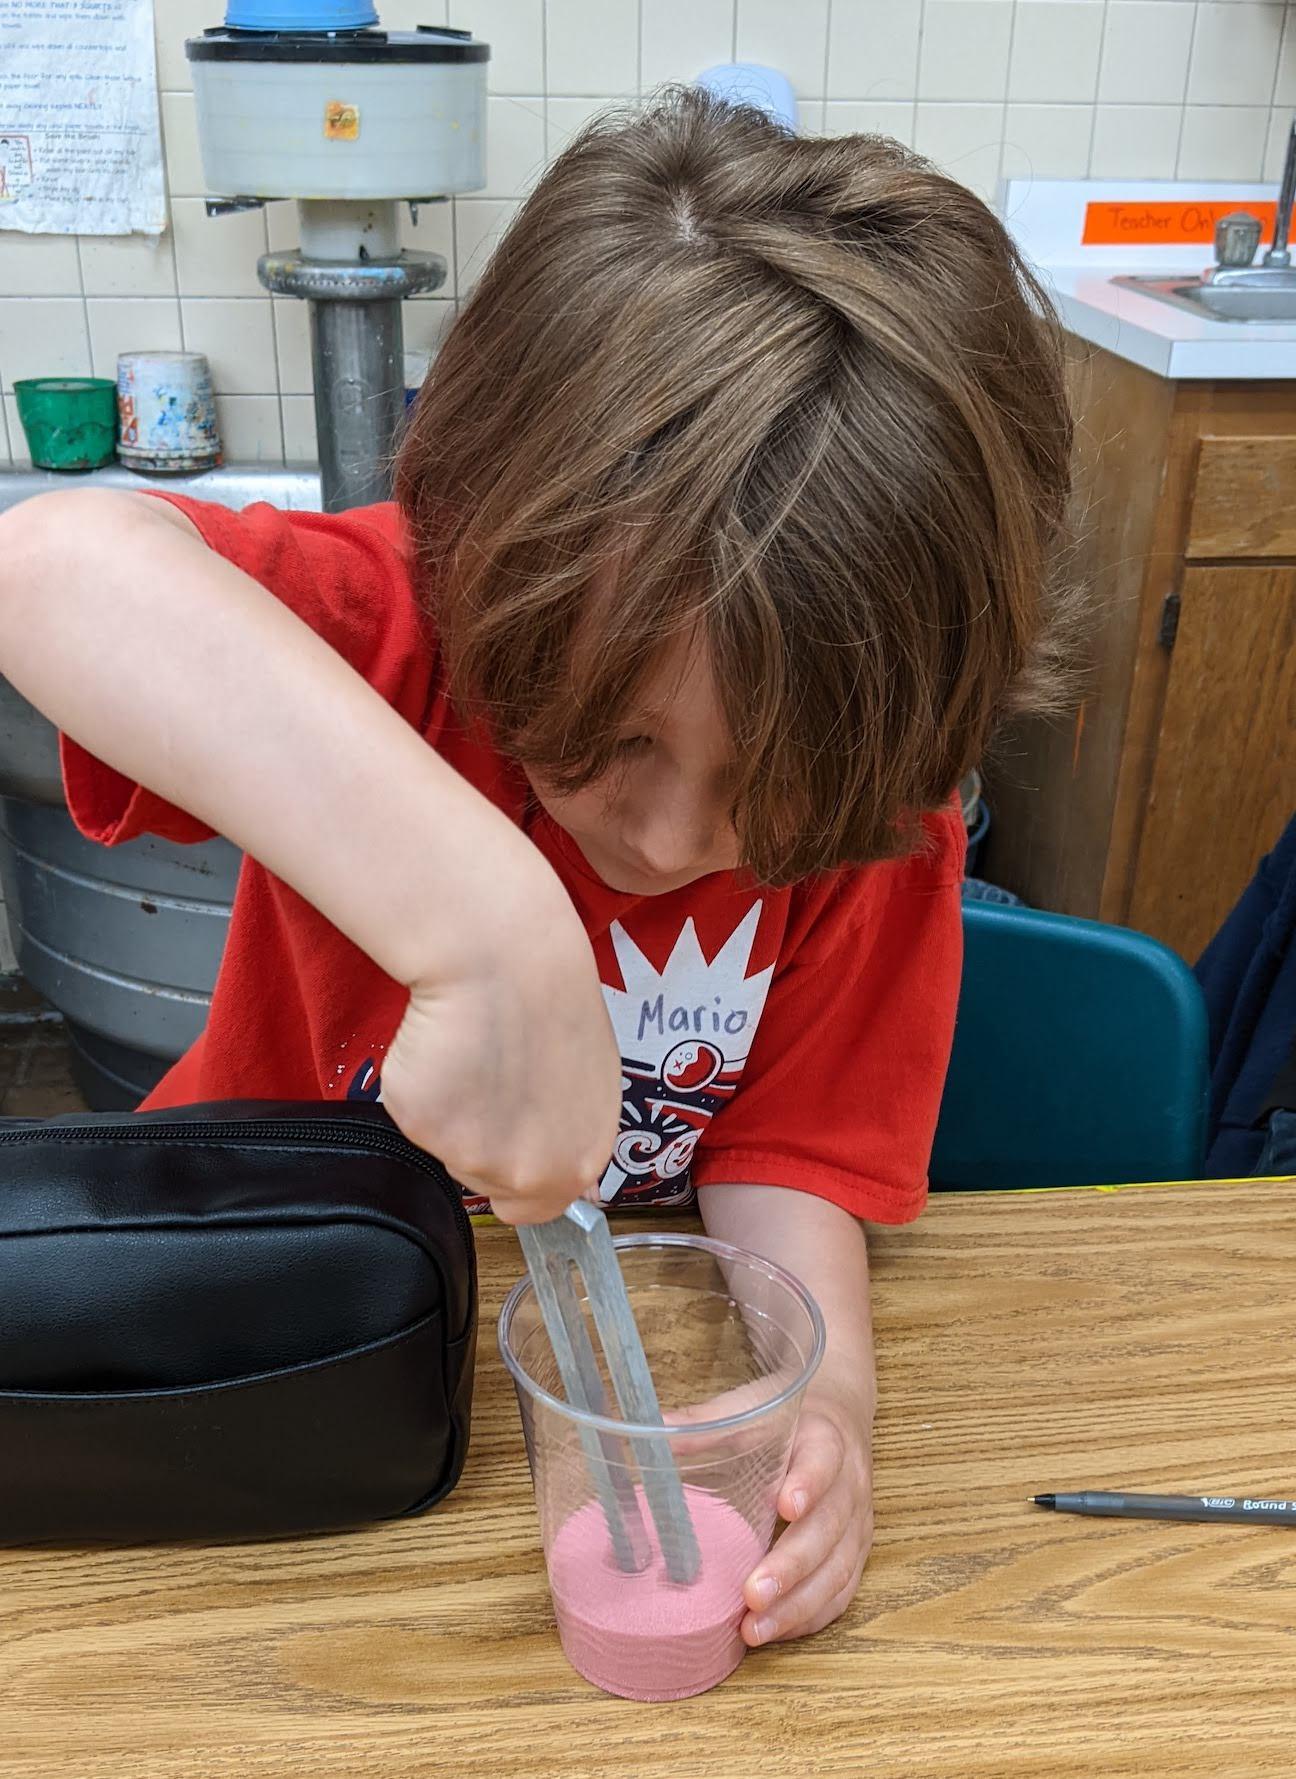 Third-grader Mario Spino sent sound vibrations through sand to see the invisible soundwaves